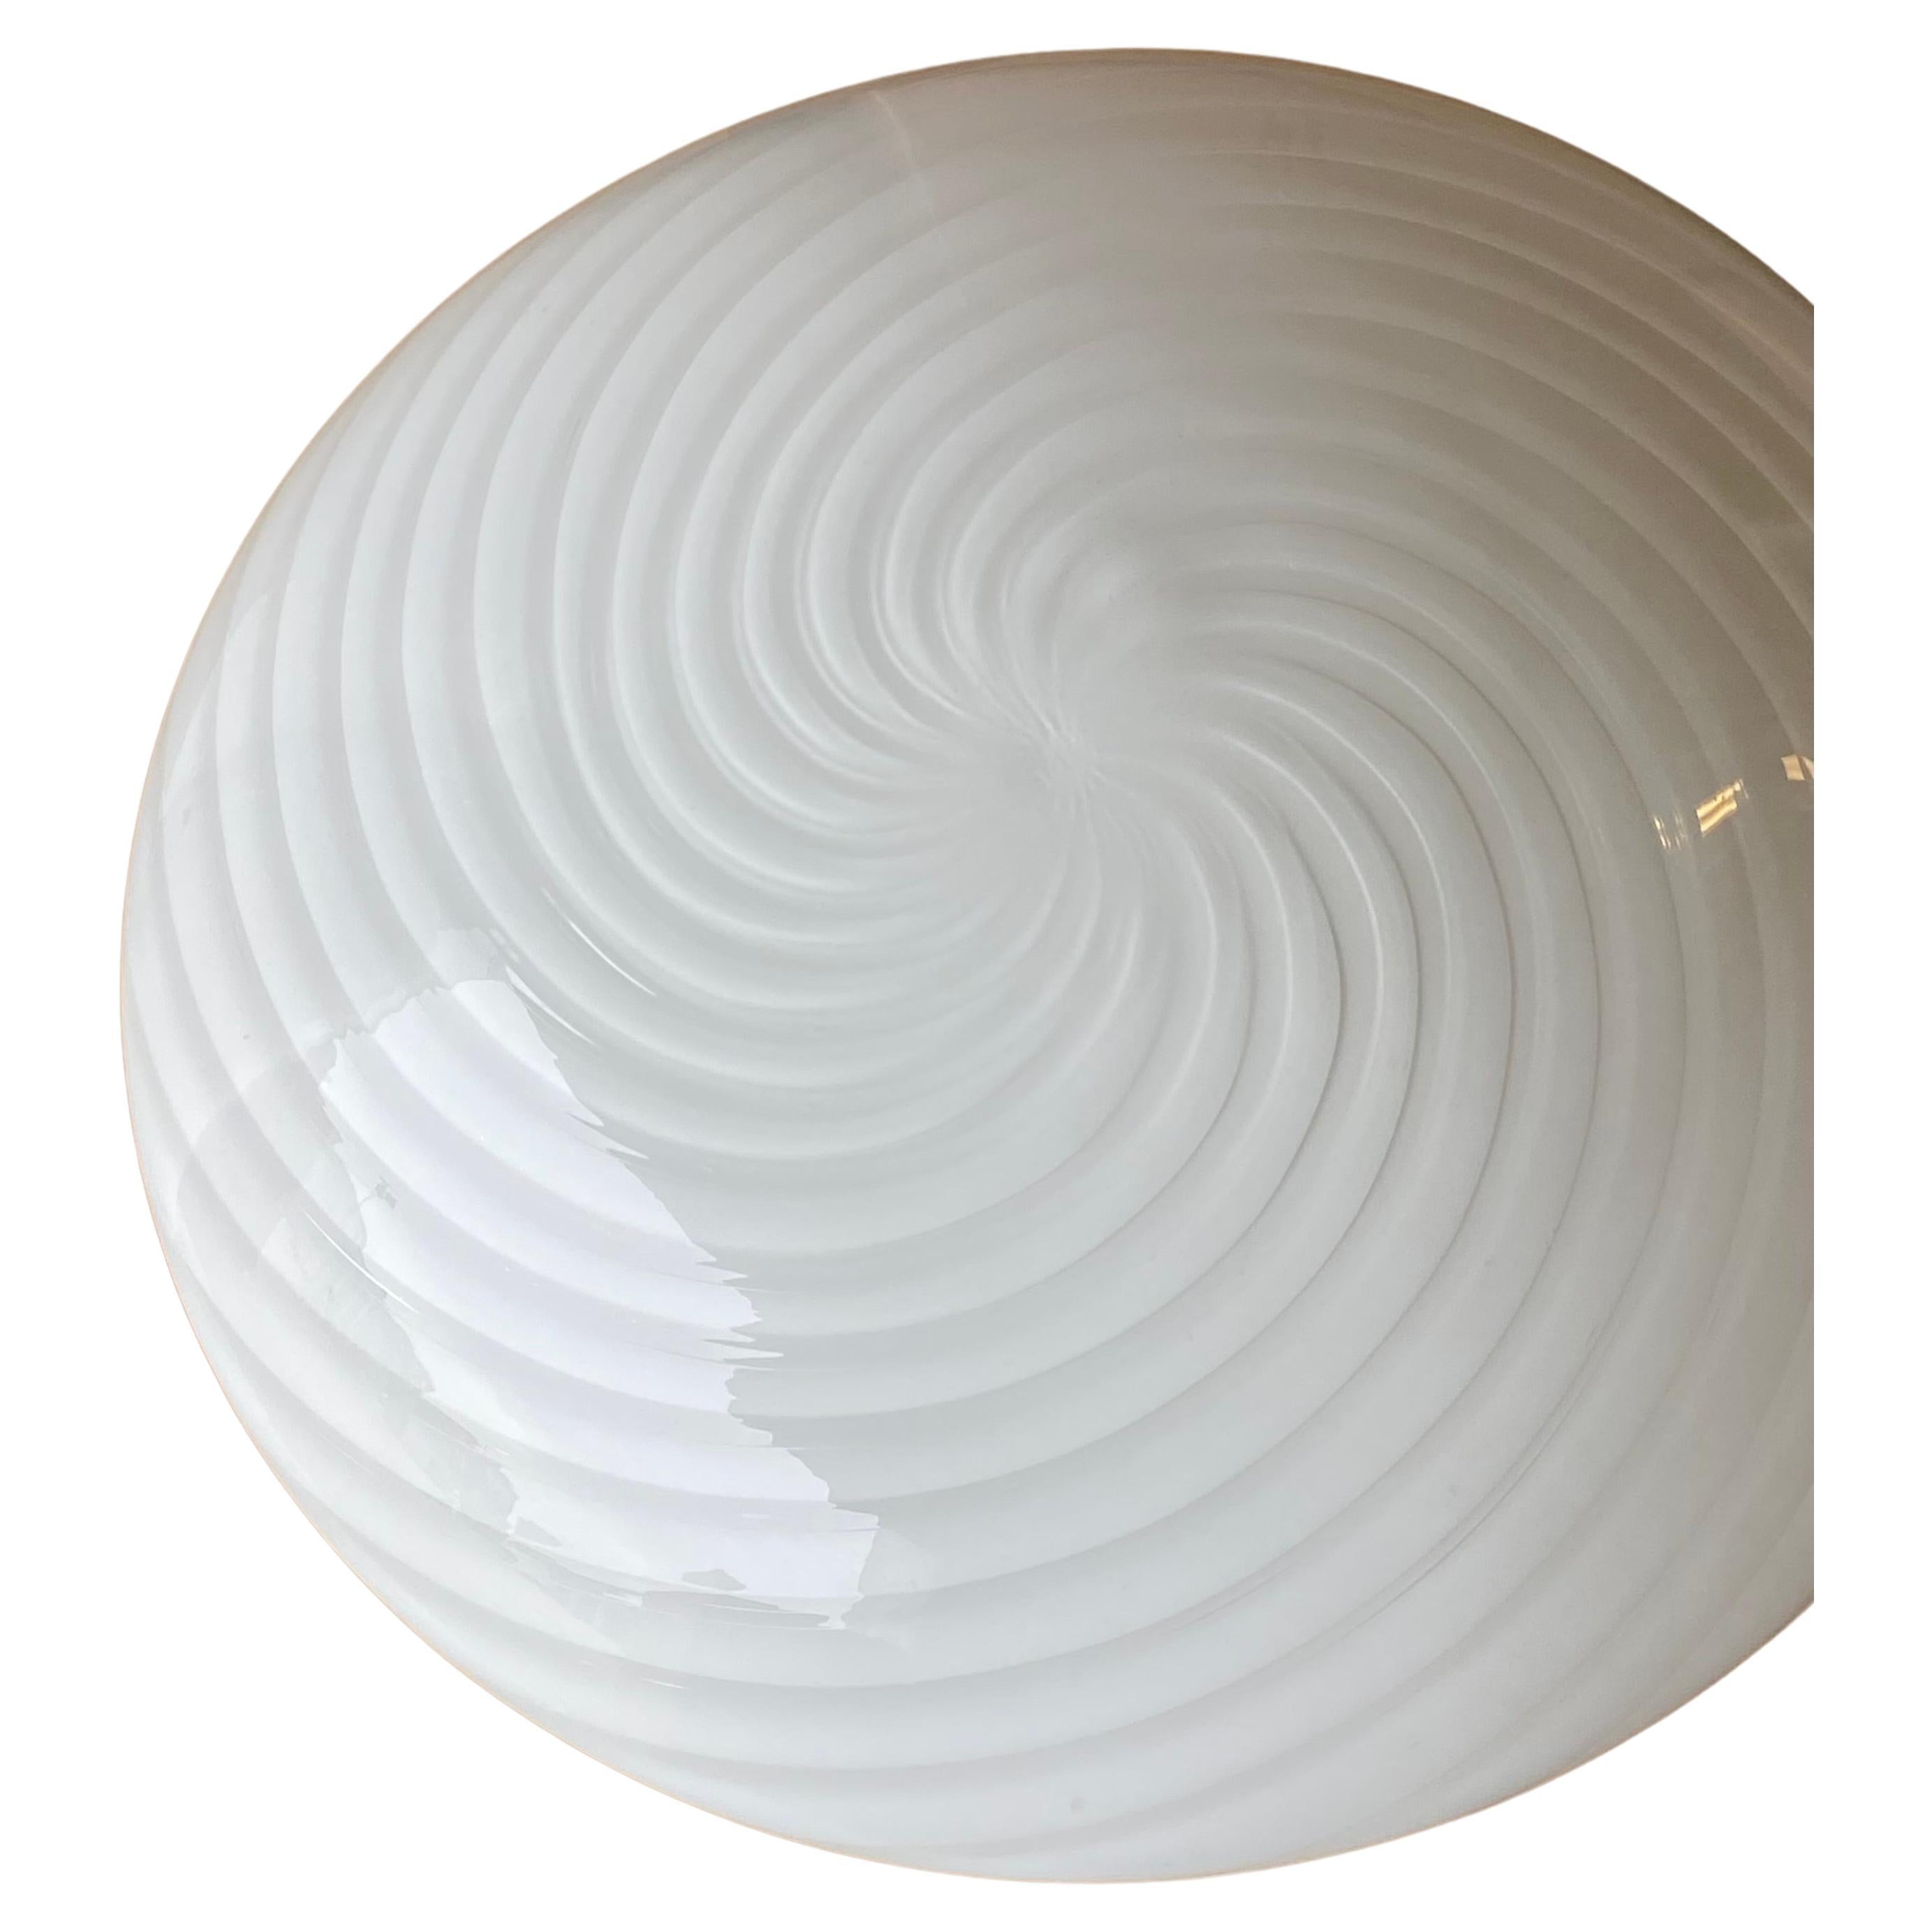 Large Vintage Murano Flush Mount Ceiling Lamp White Swirl Glass, Italy 1970s For Sale